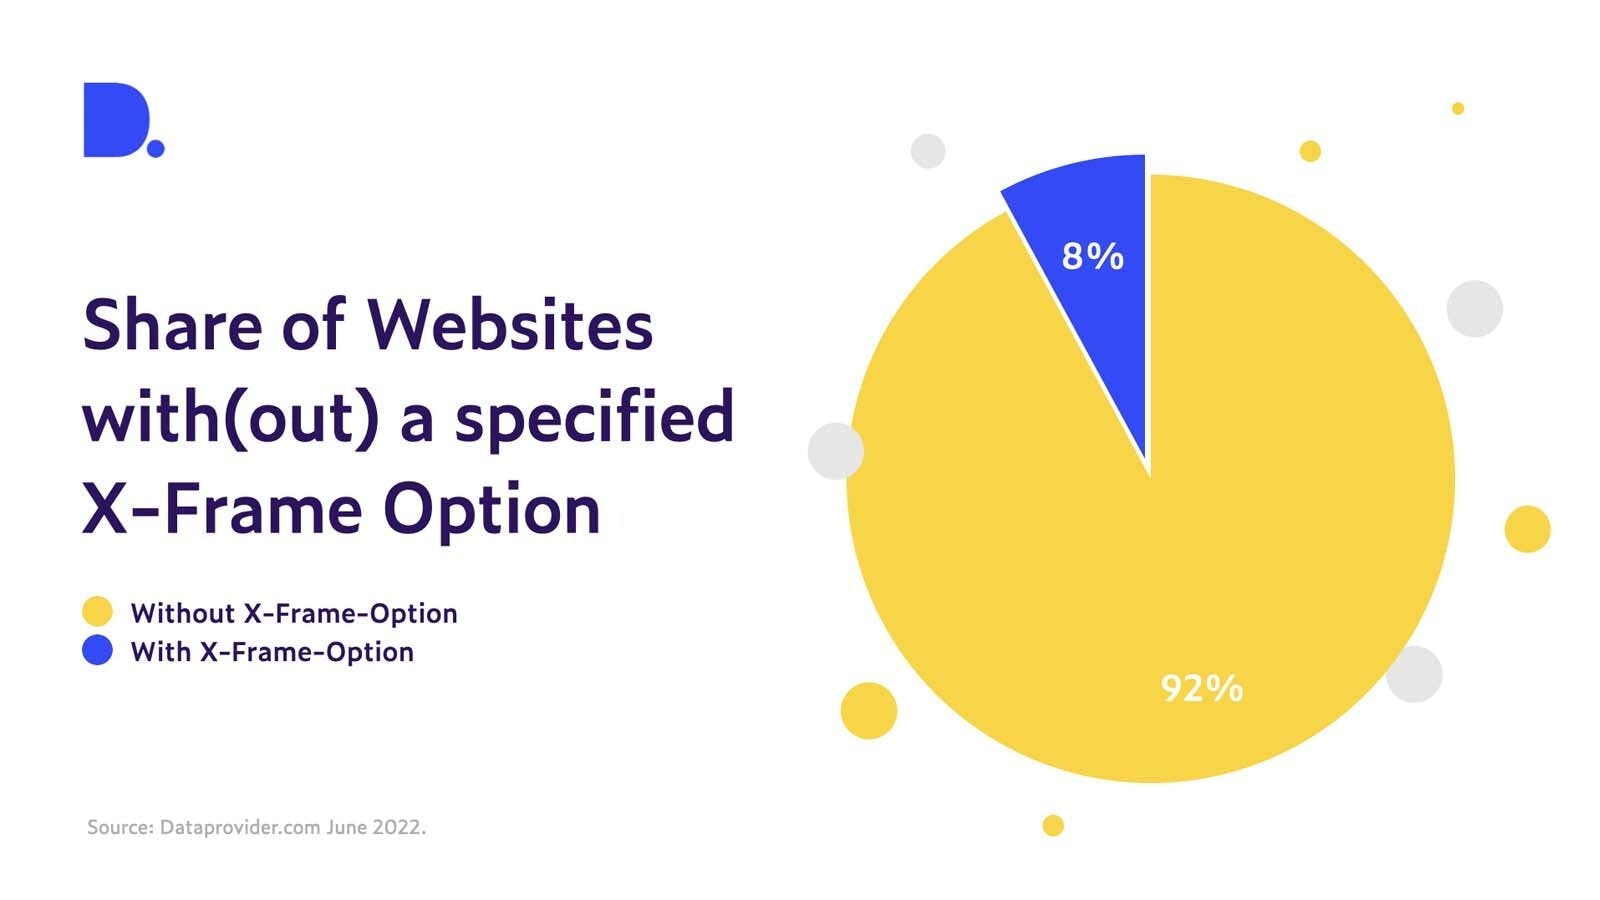 Share of websites with and without a specified X-Frame Option. 8% has an X-Frame Option, 92% of websites is set without an X-Frame-Option.